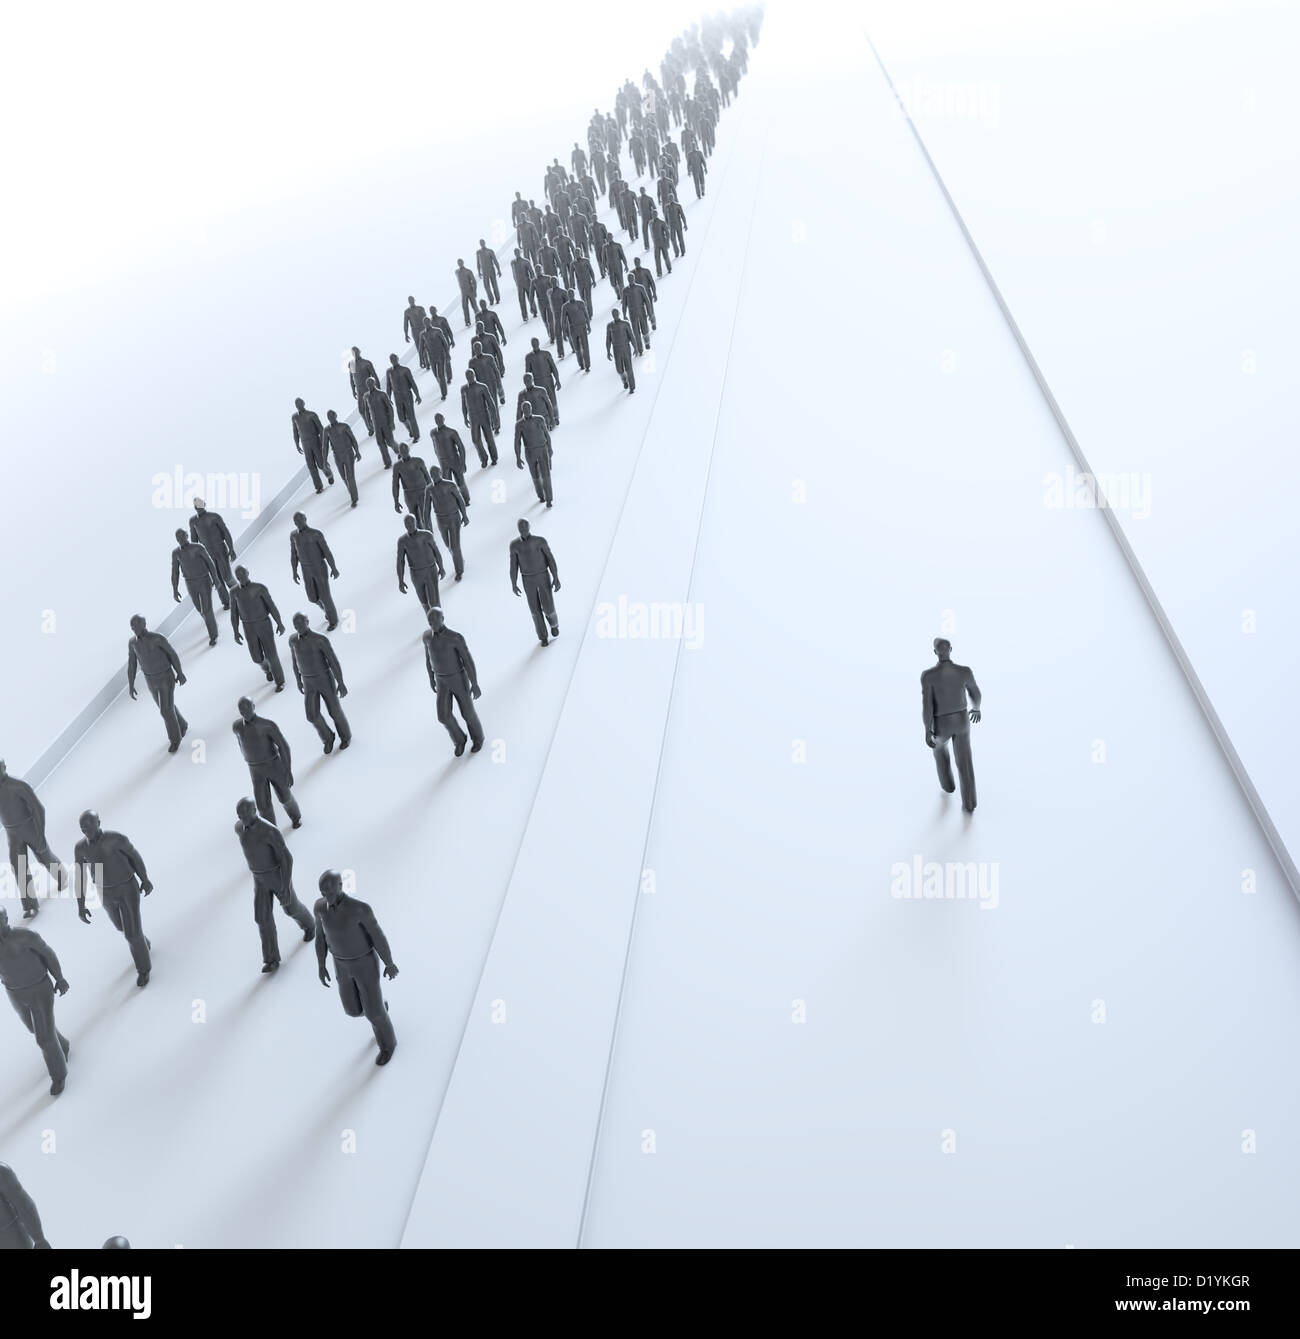 An outlier choosing his own path - tiny people walking in different  directions Stock Photo - Alamy